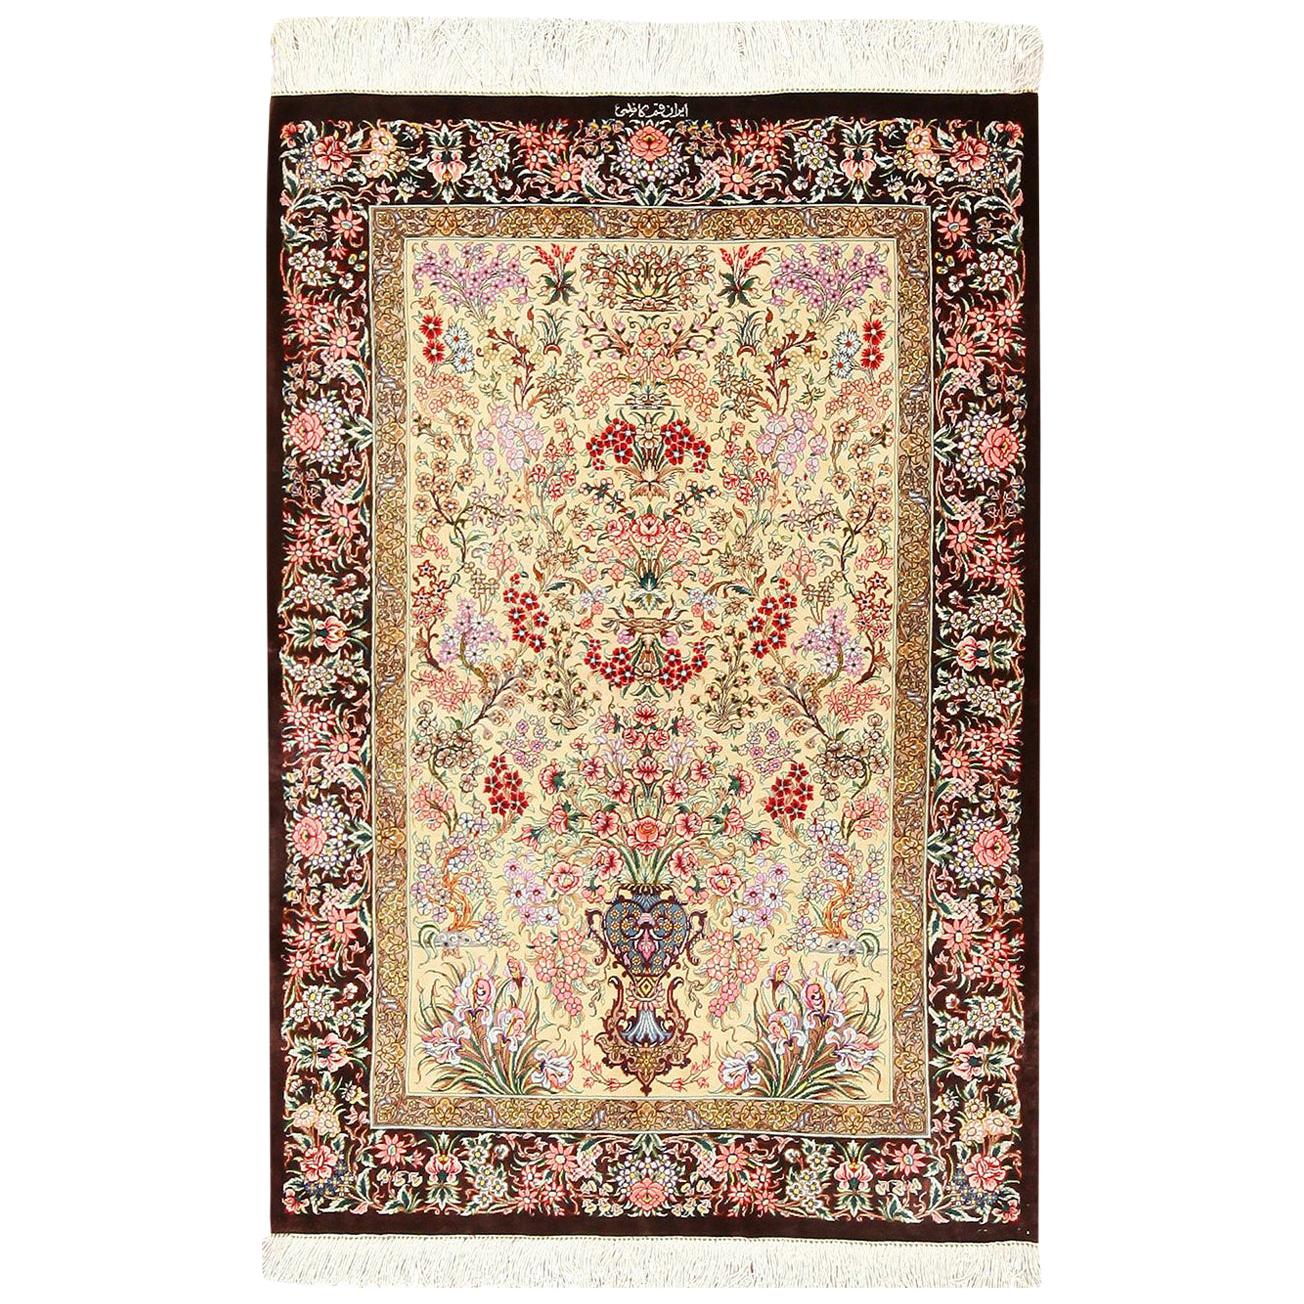 Persian Silk Small Scatter Size Qum Rug. Size: 2 ft 8 in x 3 ft 10 in